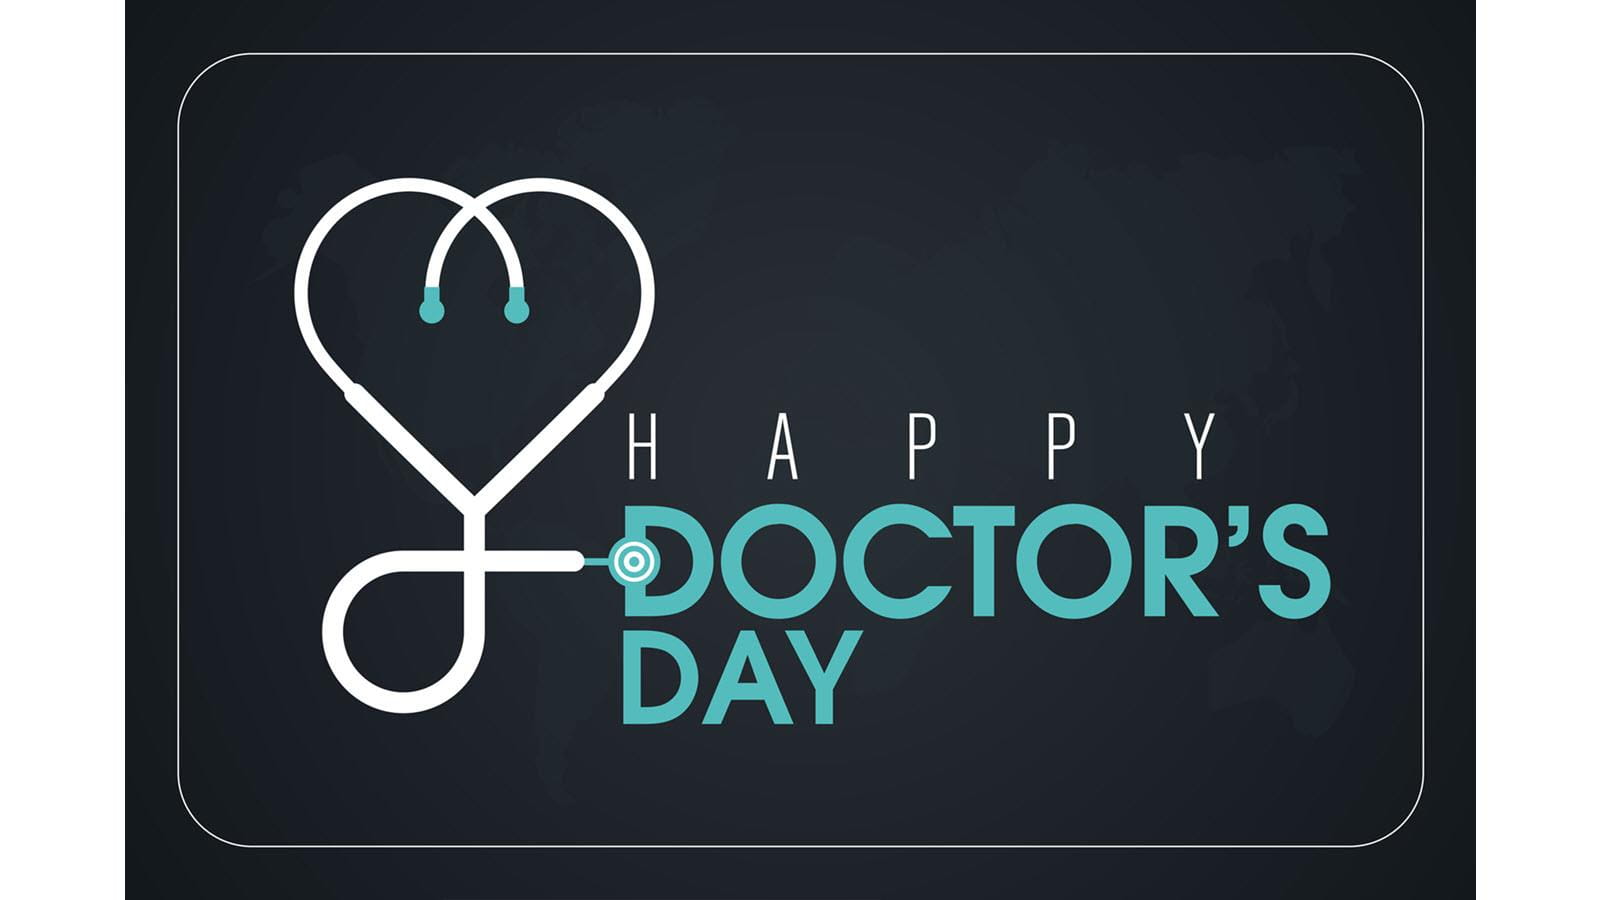 Happy Doctor's Day message next to a heart-shaped stethoscope